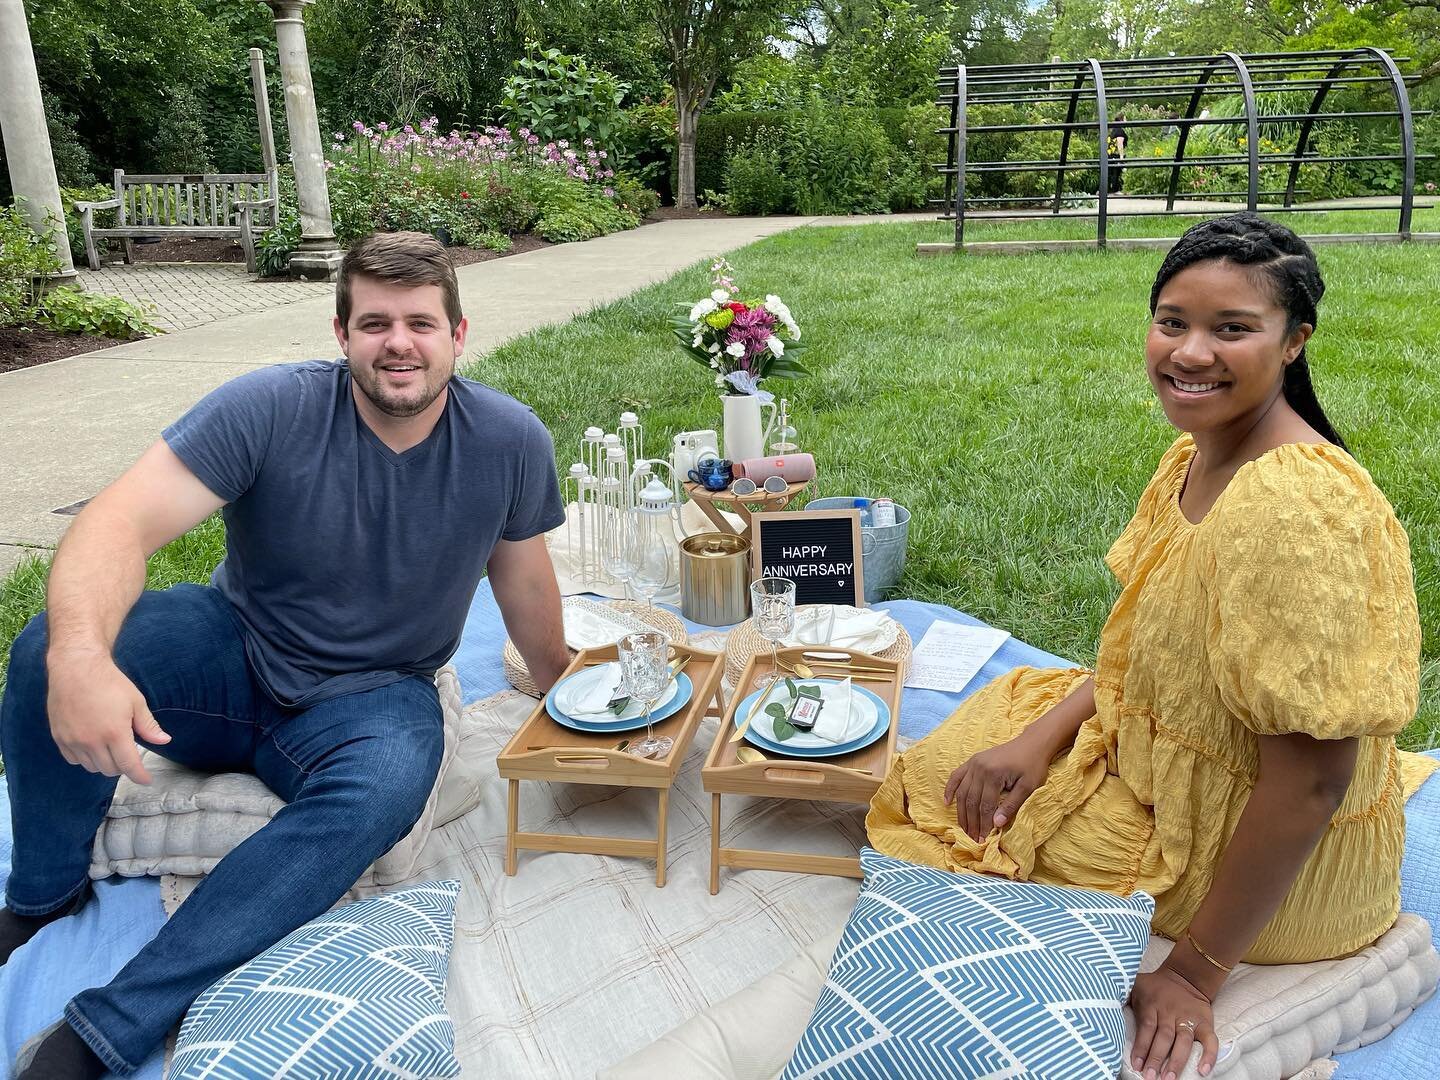 Happy anniversary to this beautiful couple! In the most serendipitous moment, we set up their picnic in the same spot they got married! 🎉💙

#picnicdate #picnicandchill #anniversary #anniversarynight #anniversarydate #loveisintheair #naturedate #rom